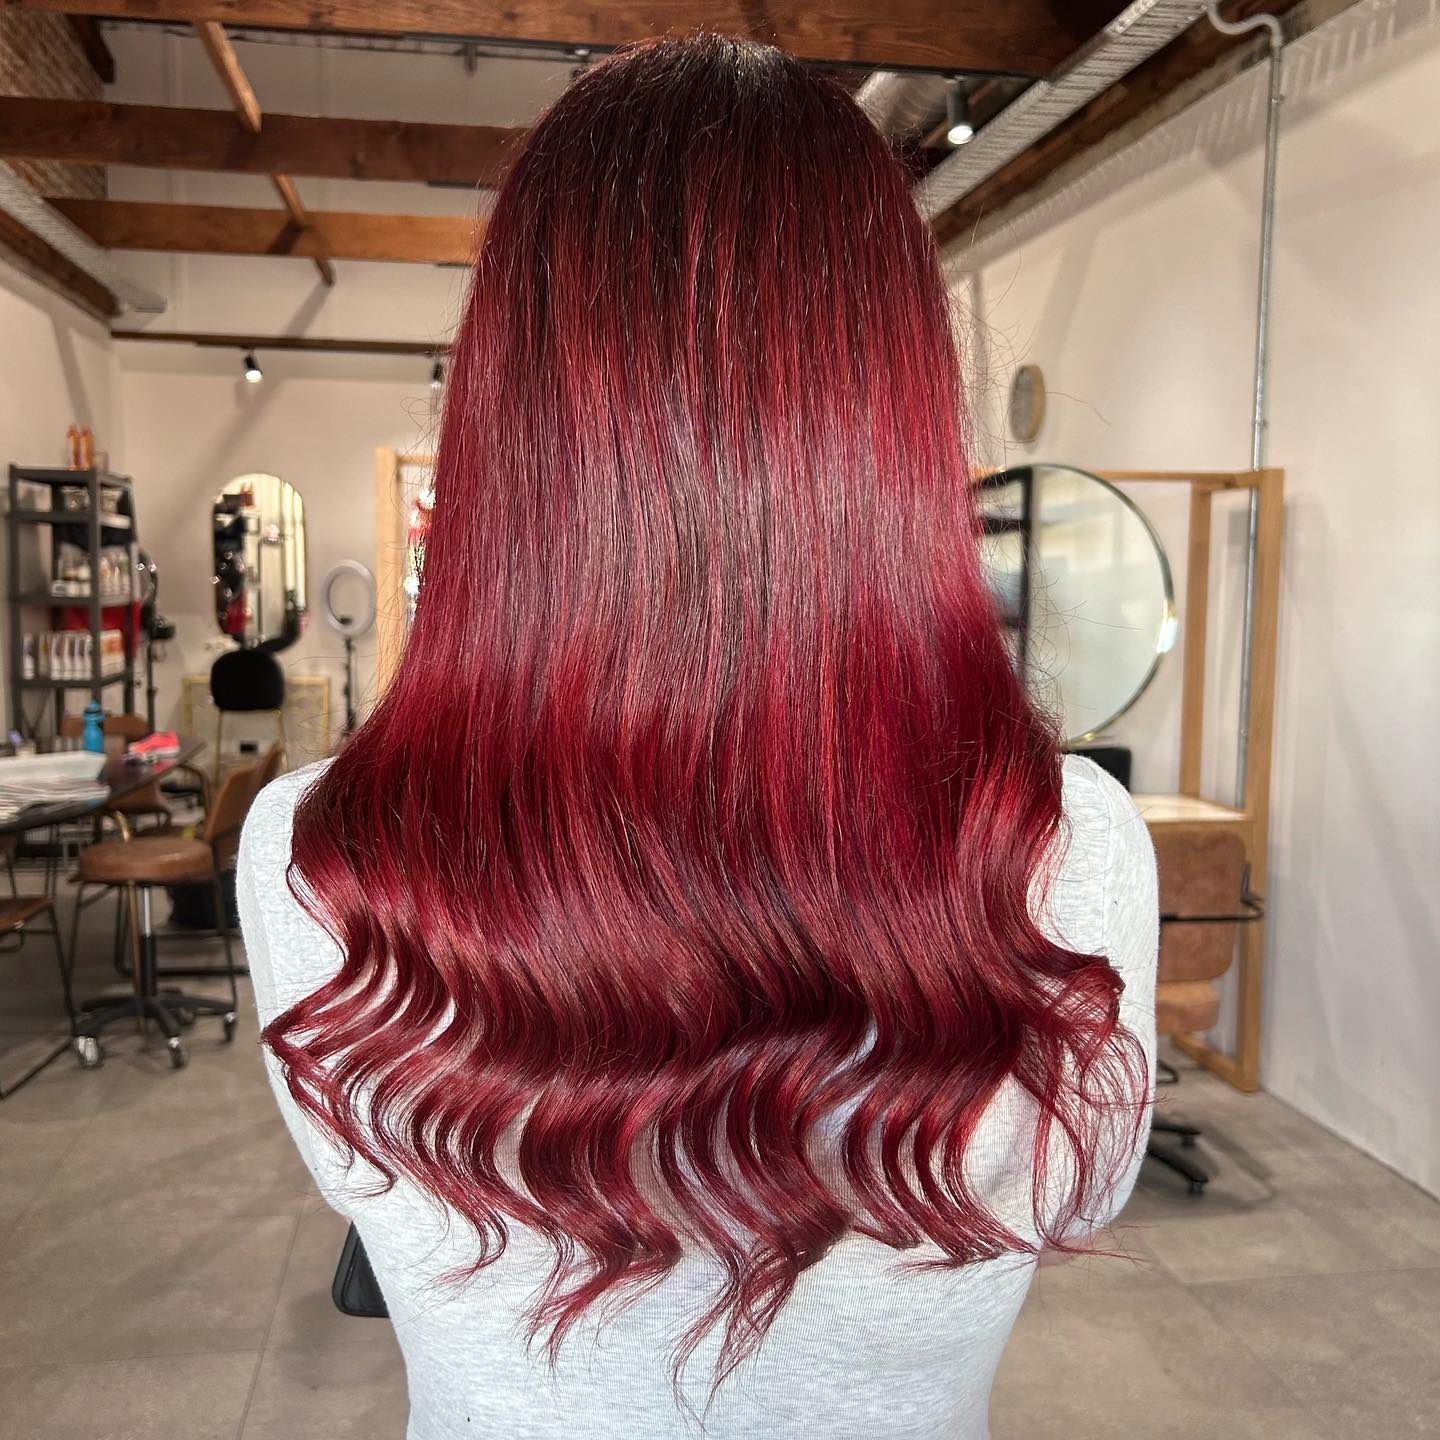 red ombre hair style 79 Natural red ombre hair | Red ombre background | Red ombre hair Red Ombre Hairstyles